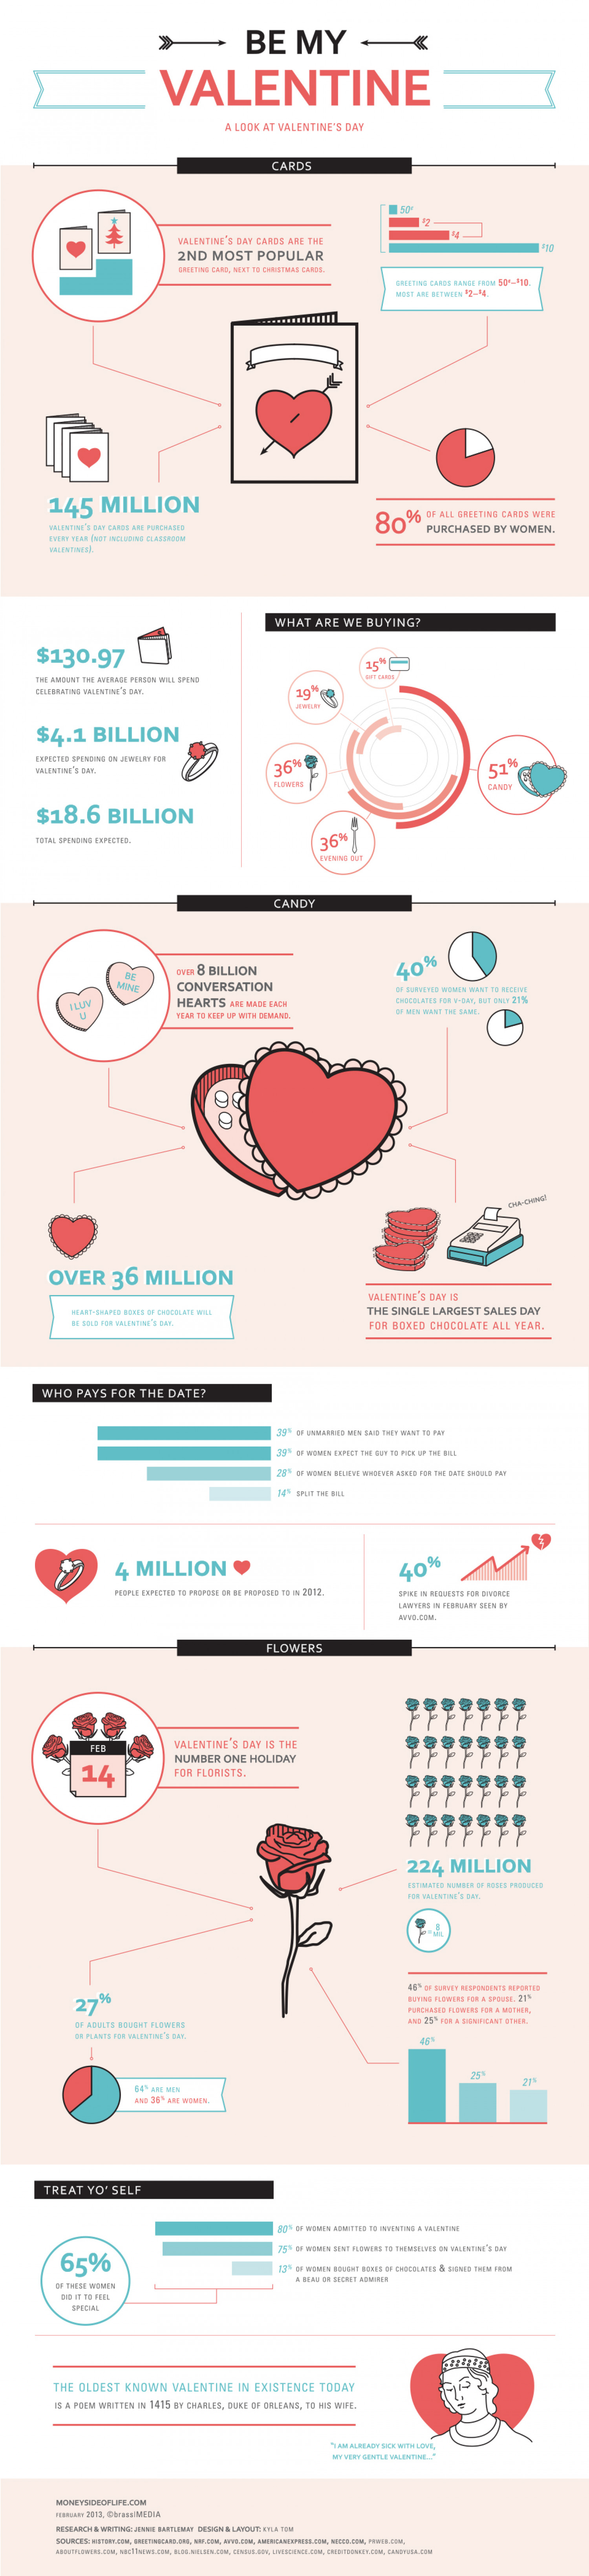 Be My Valentine: A Look at Valentine's Day Spending Infographic